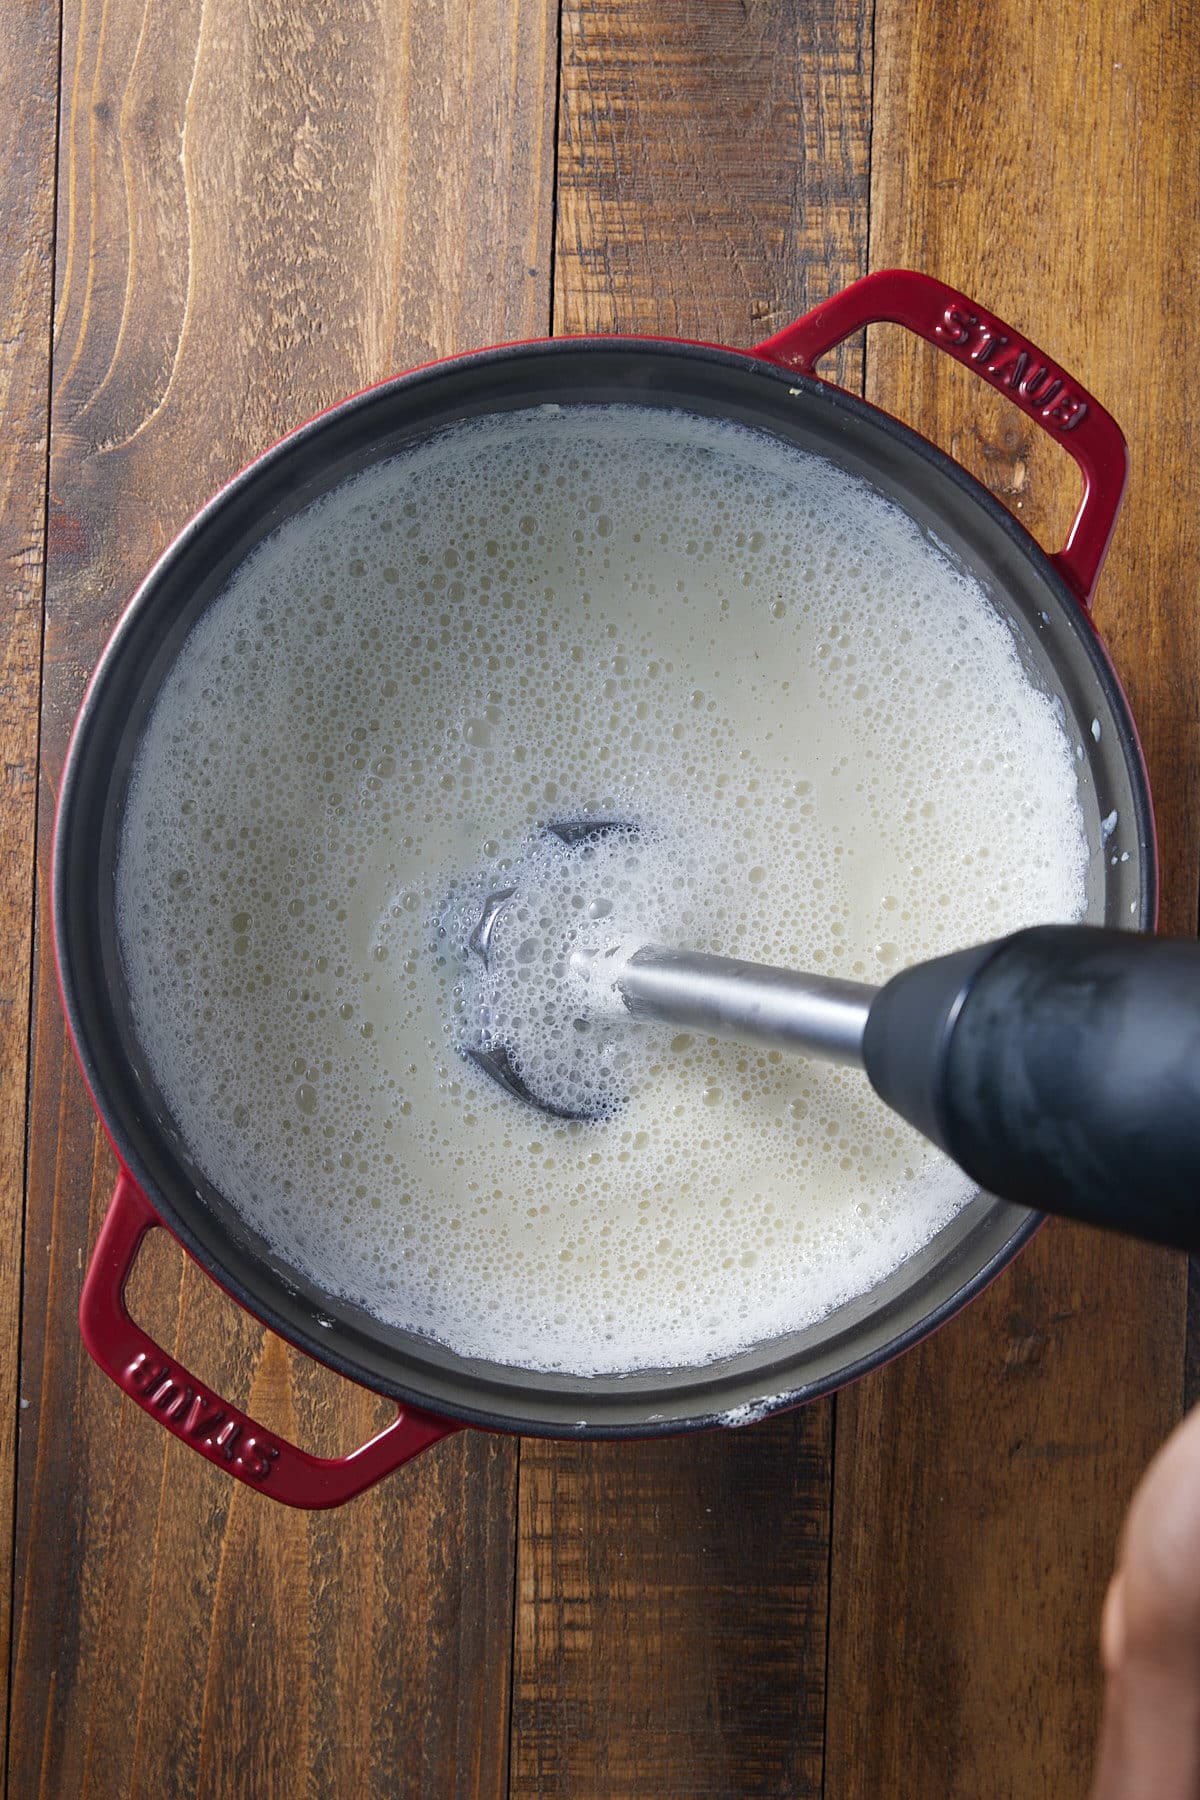 Cauliflower soup being blended in the pot with an immersion blender